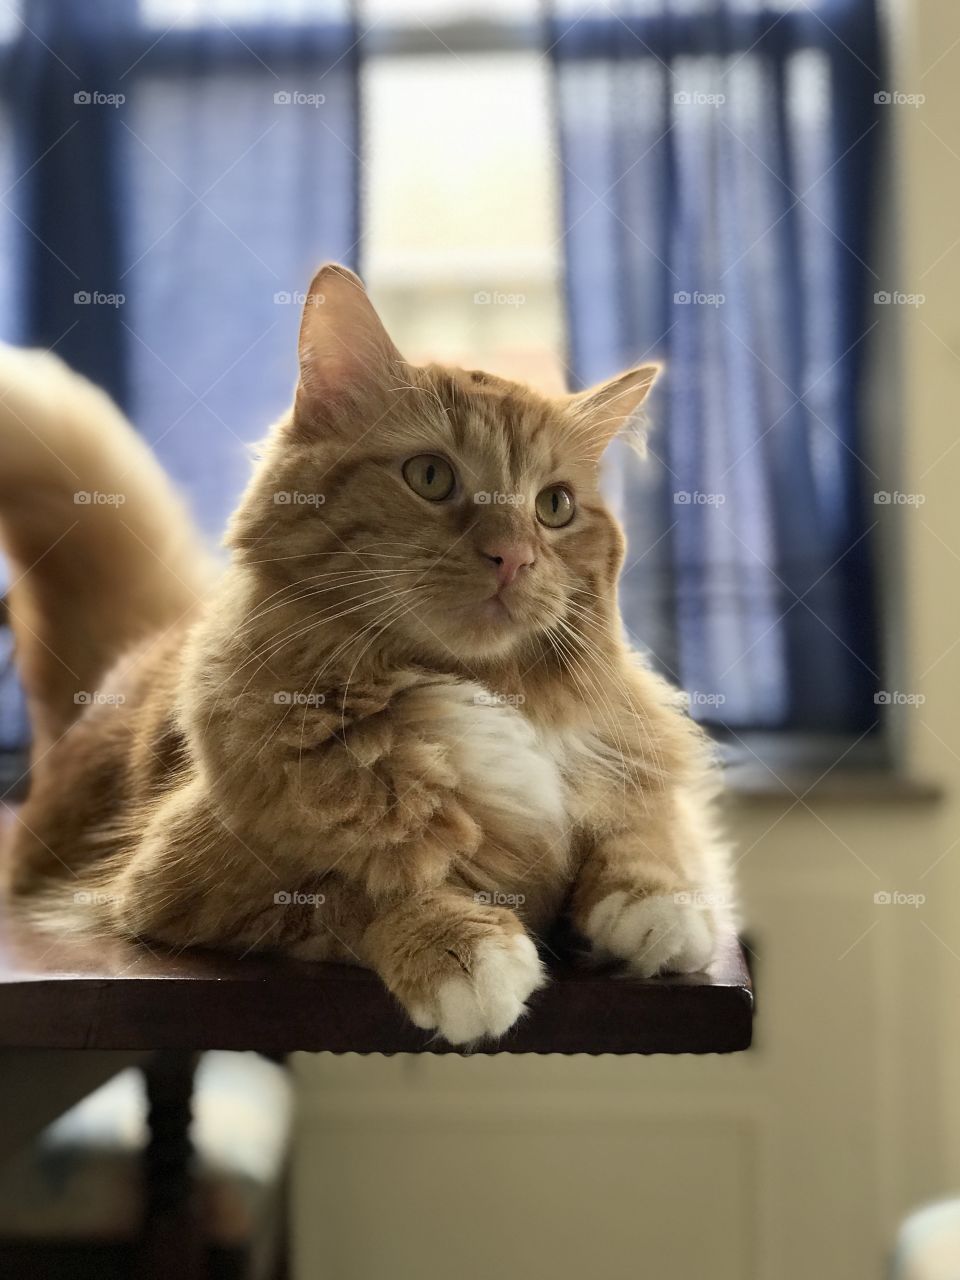 Cute Maine coon cat on a table